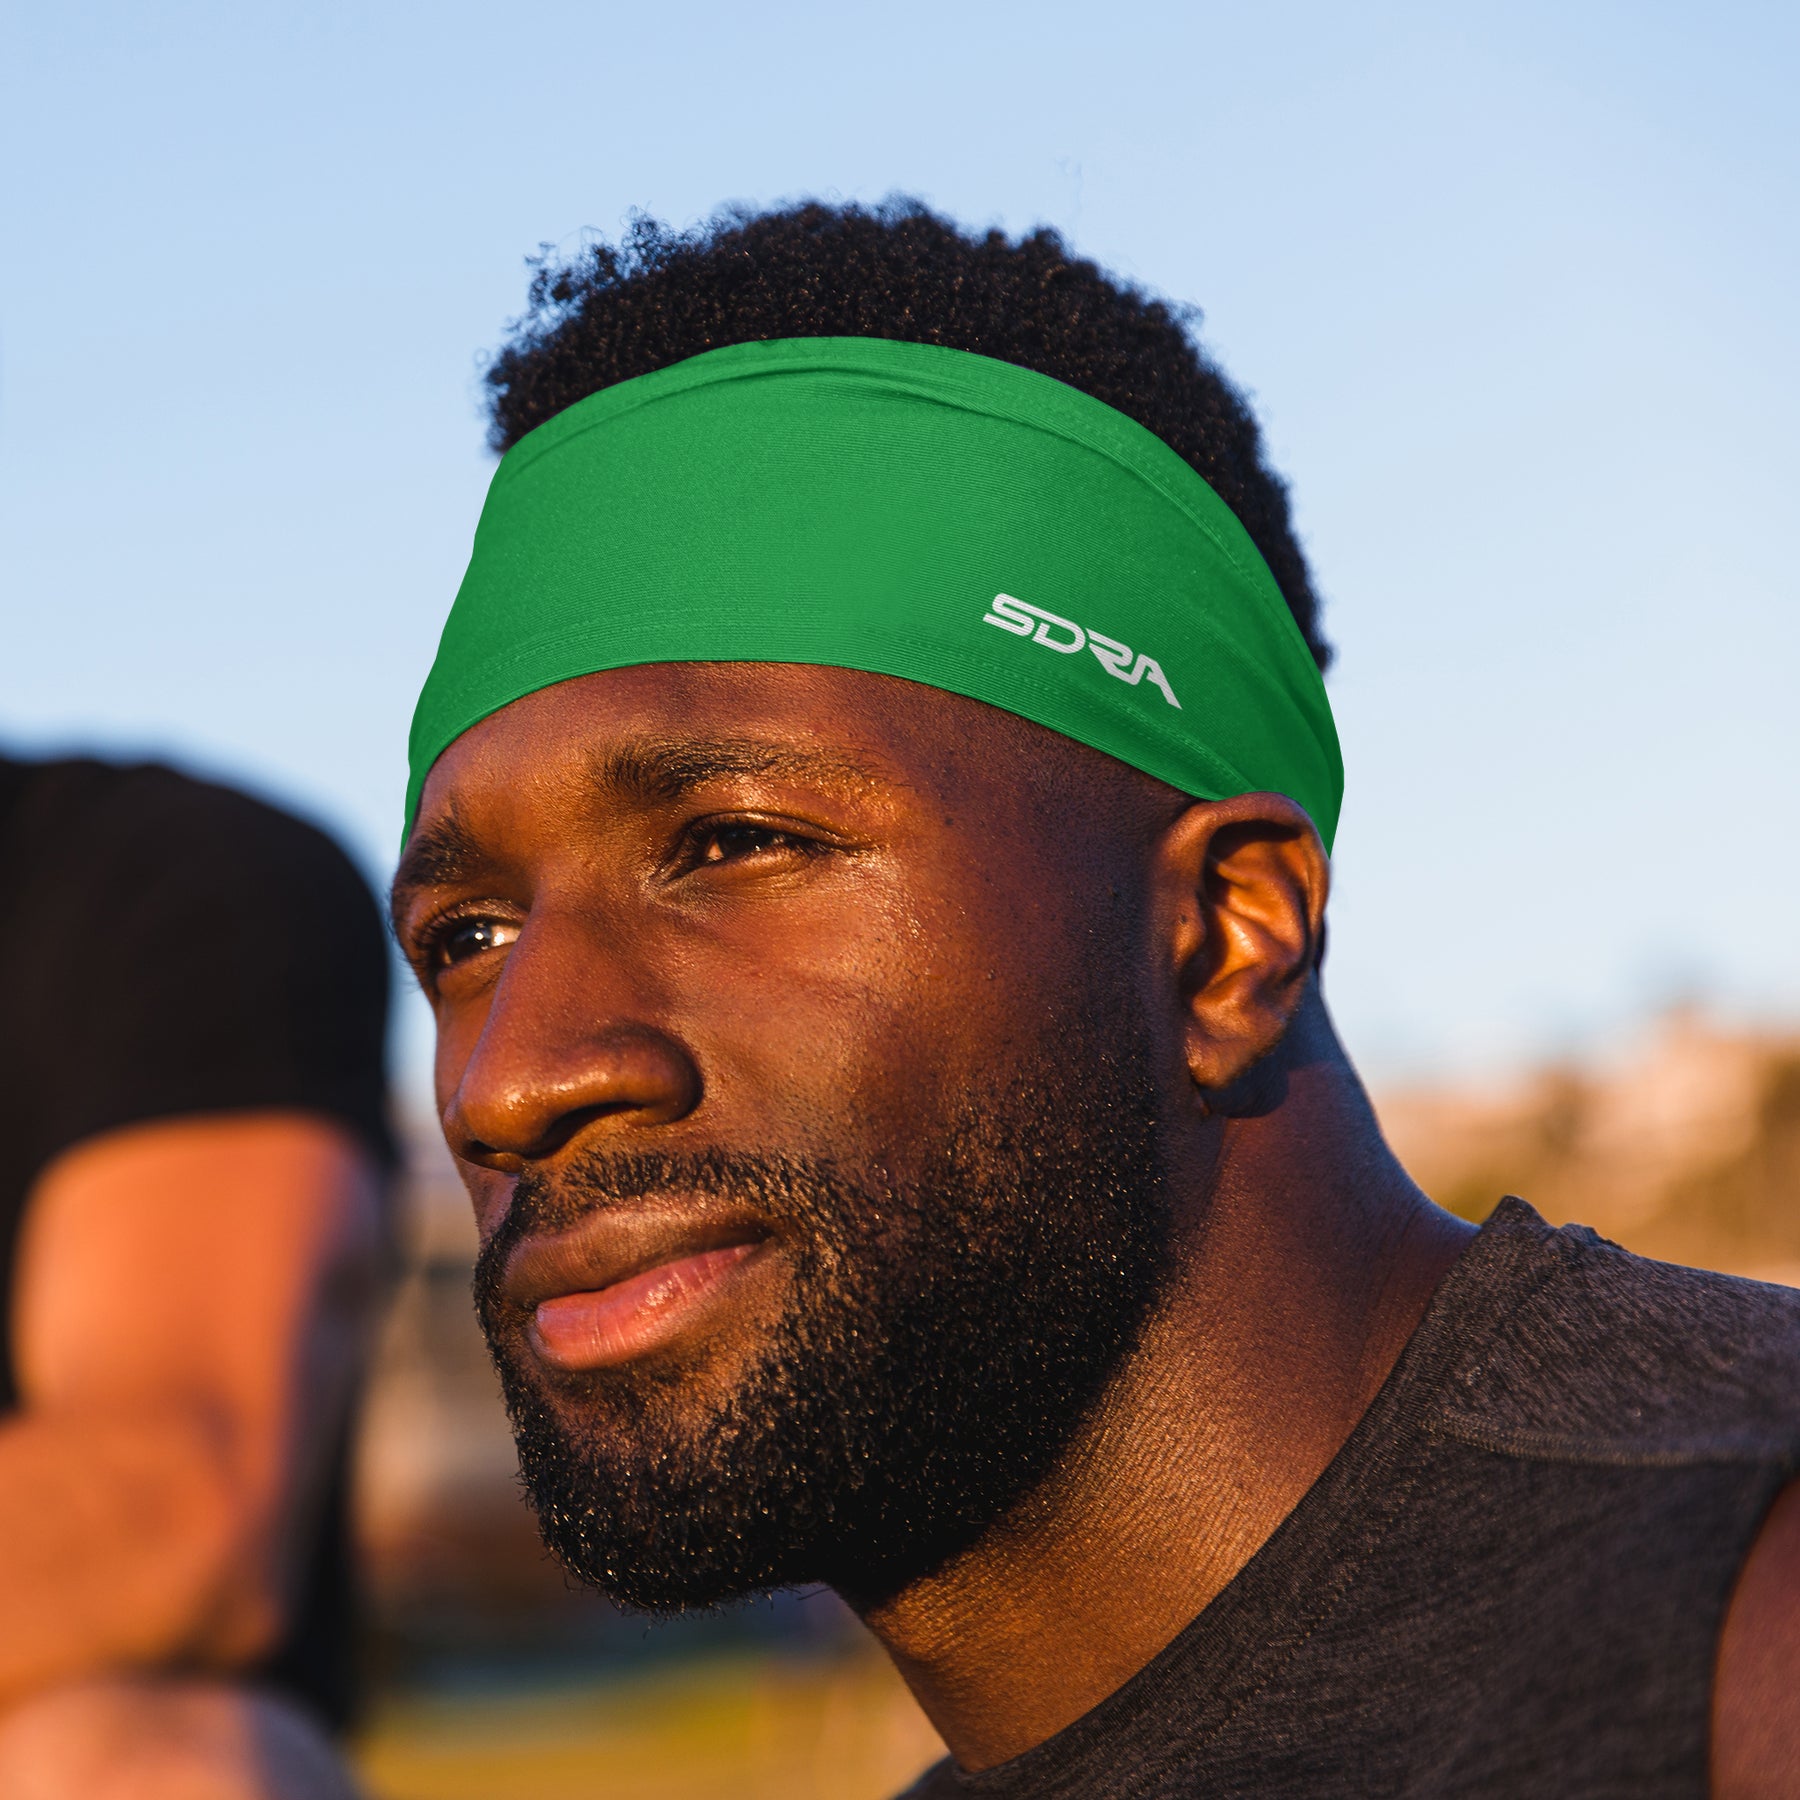 Solid Color Tapered Headband